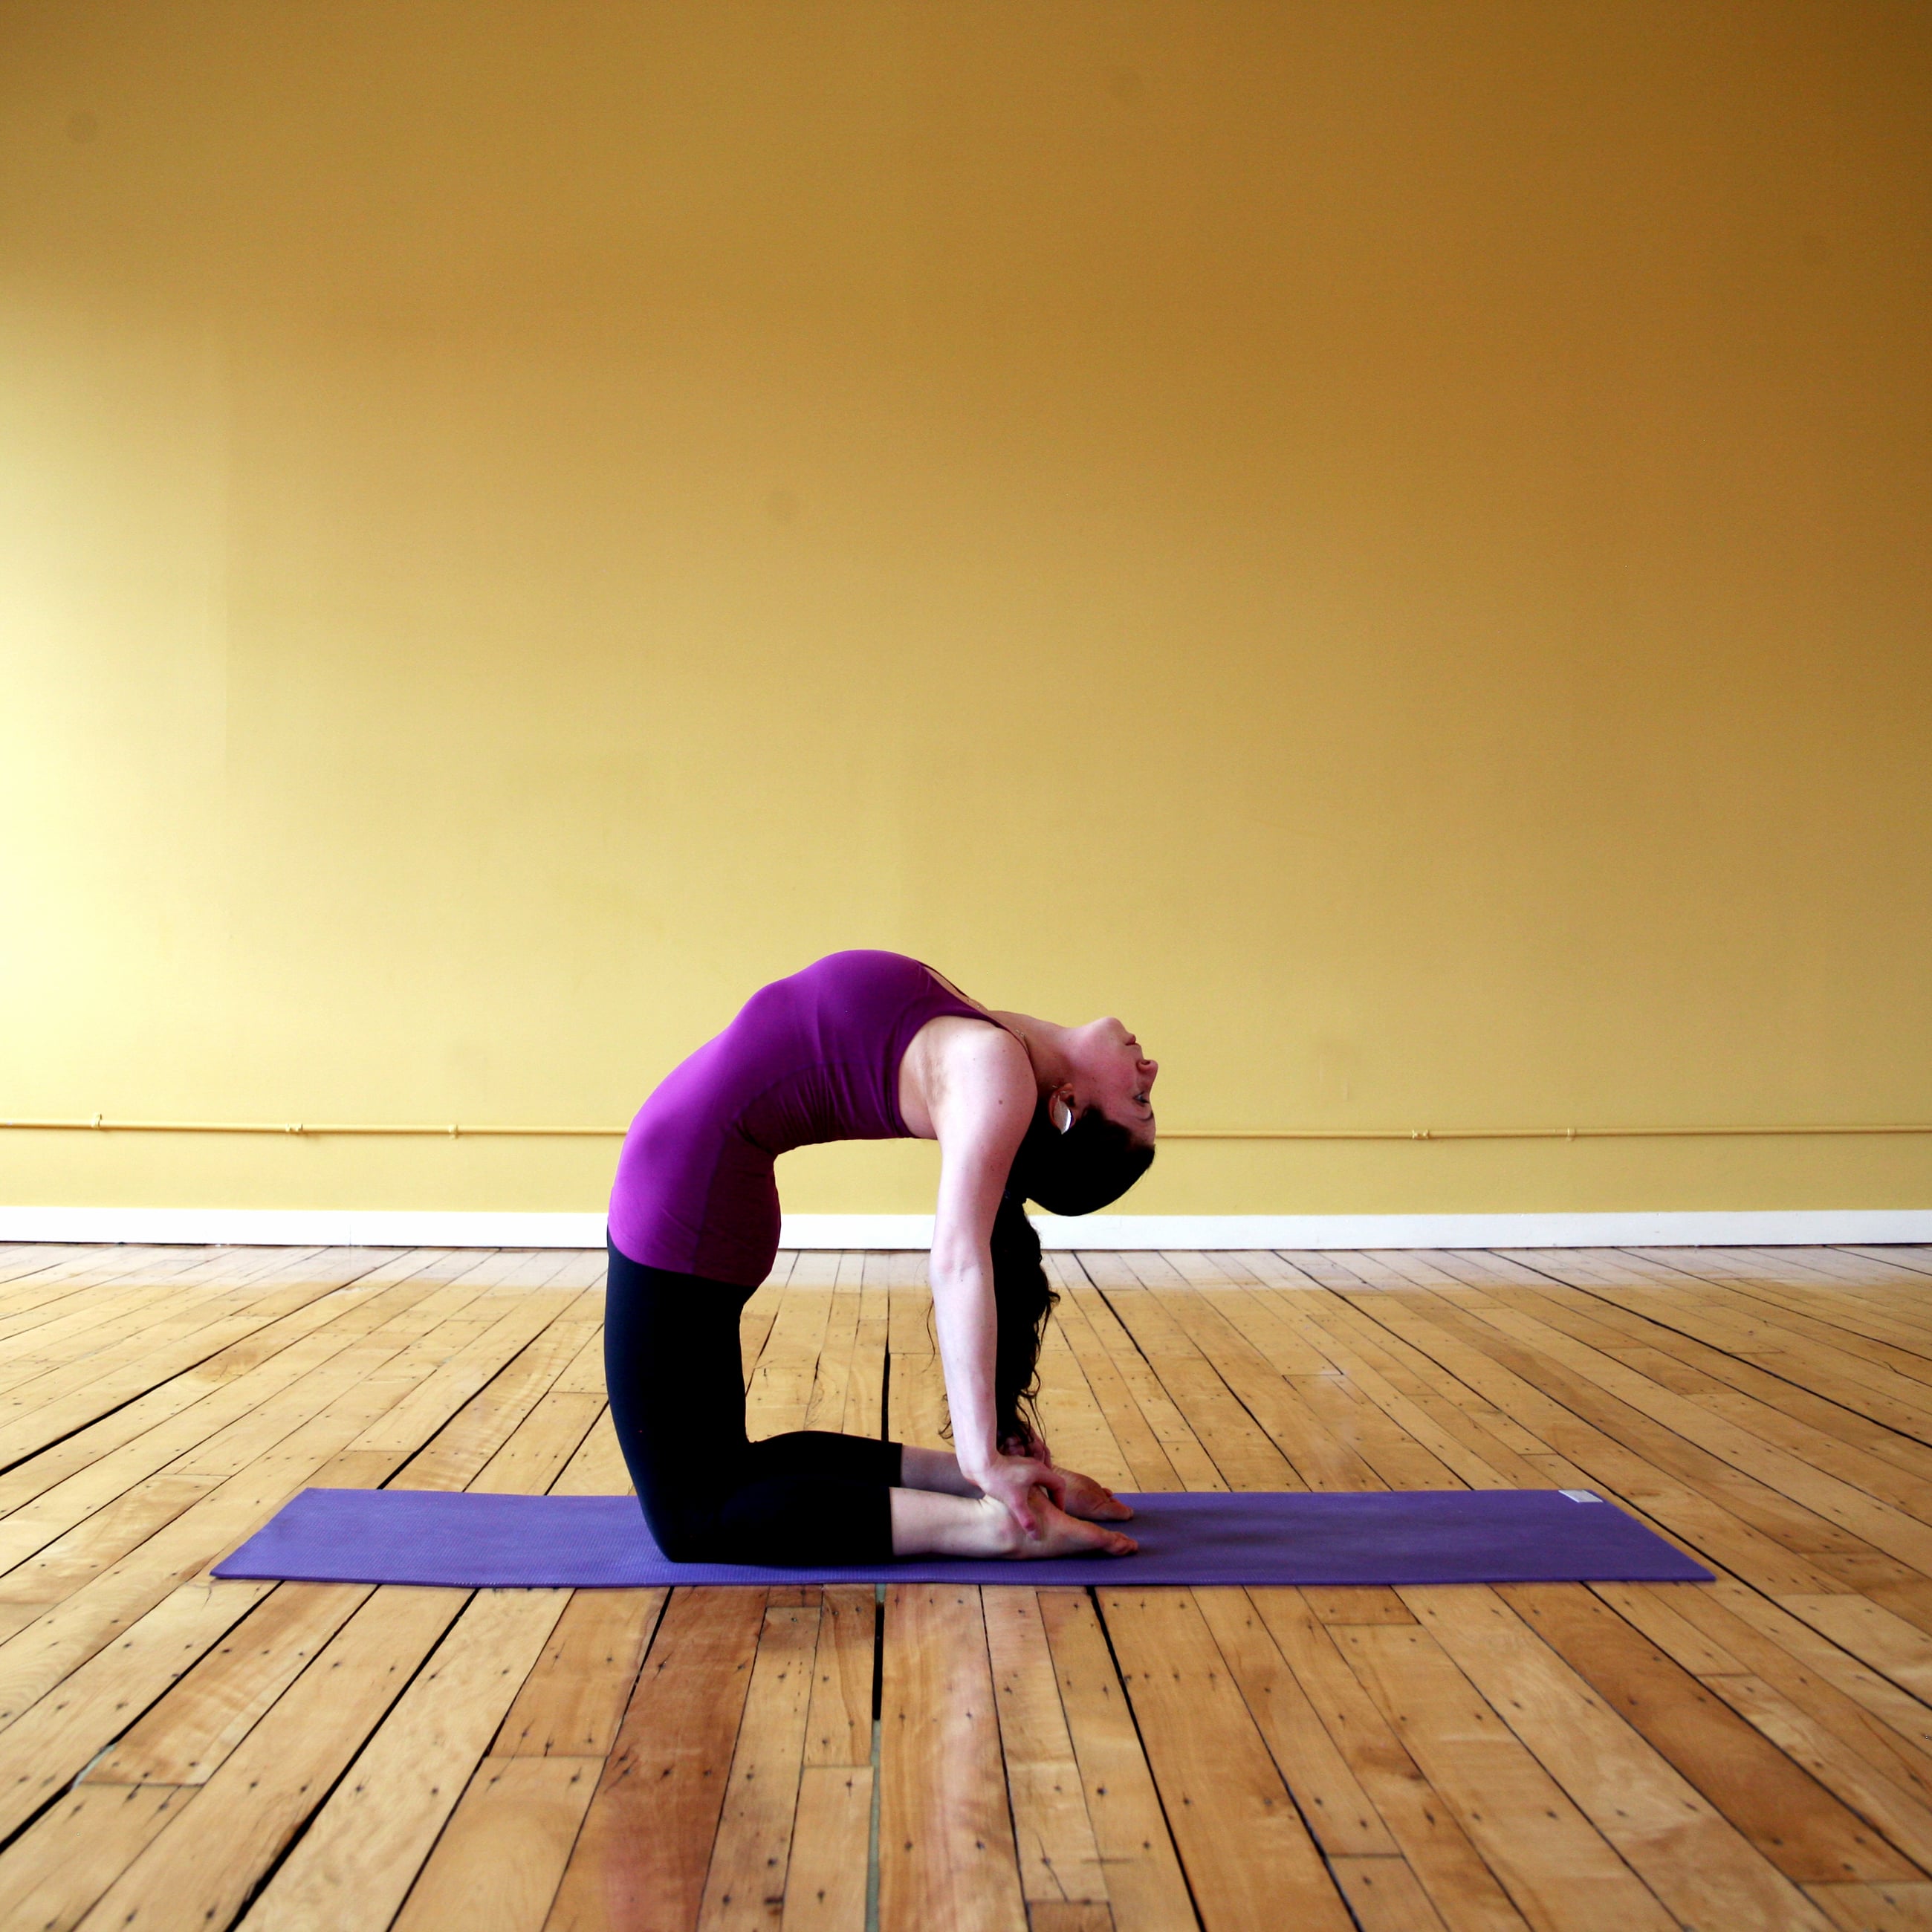 Is Yoga Stretching? Here's the Difference